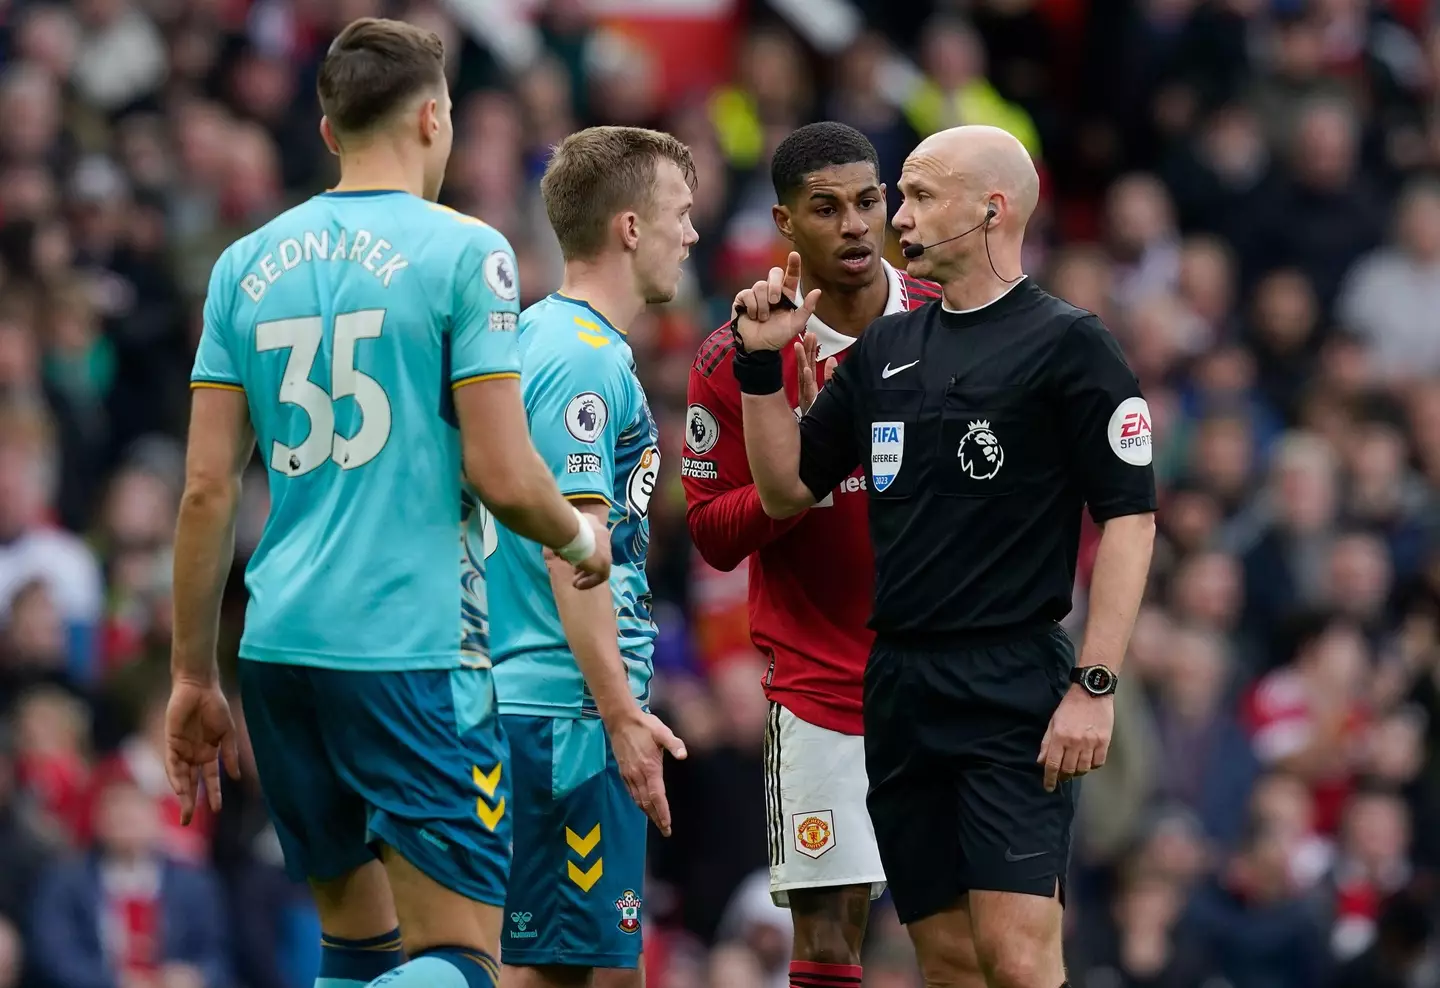 Rashford, like his teammates, was not happy with the referee. Image: Alamy